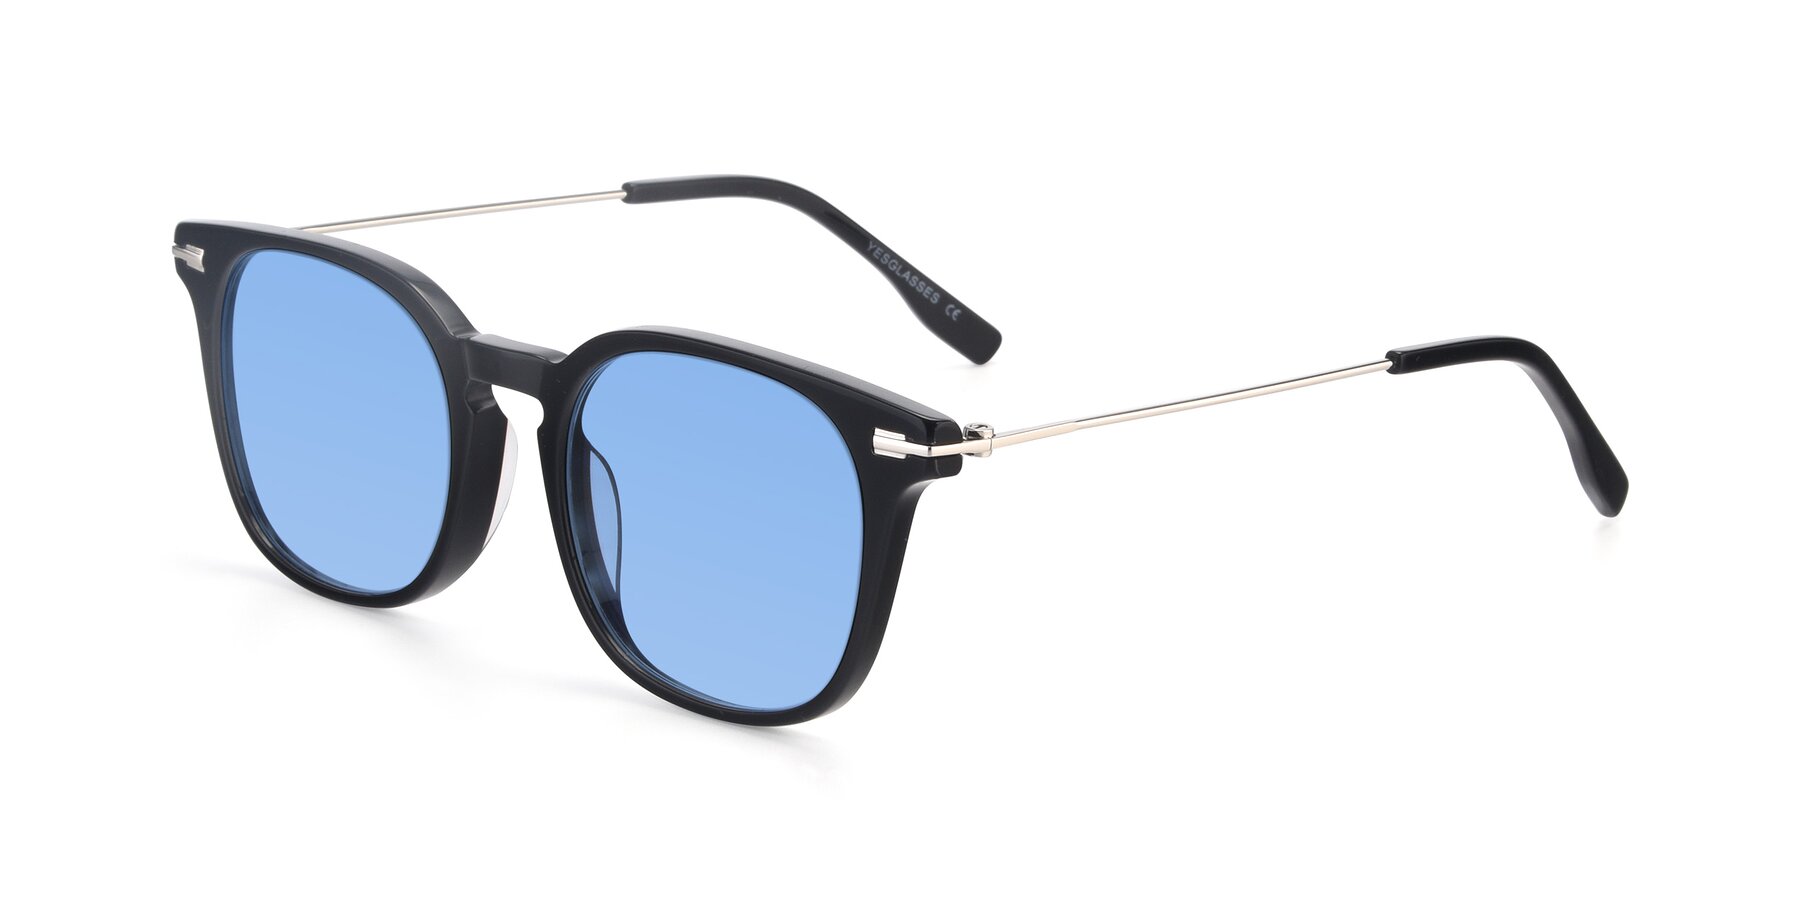 Angle of 17711 in Black with Medium Blue Tinted Lenses